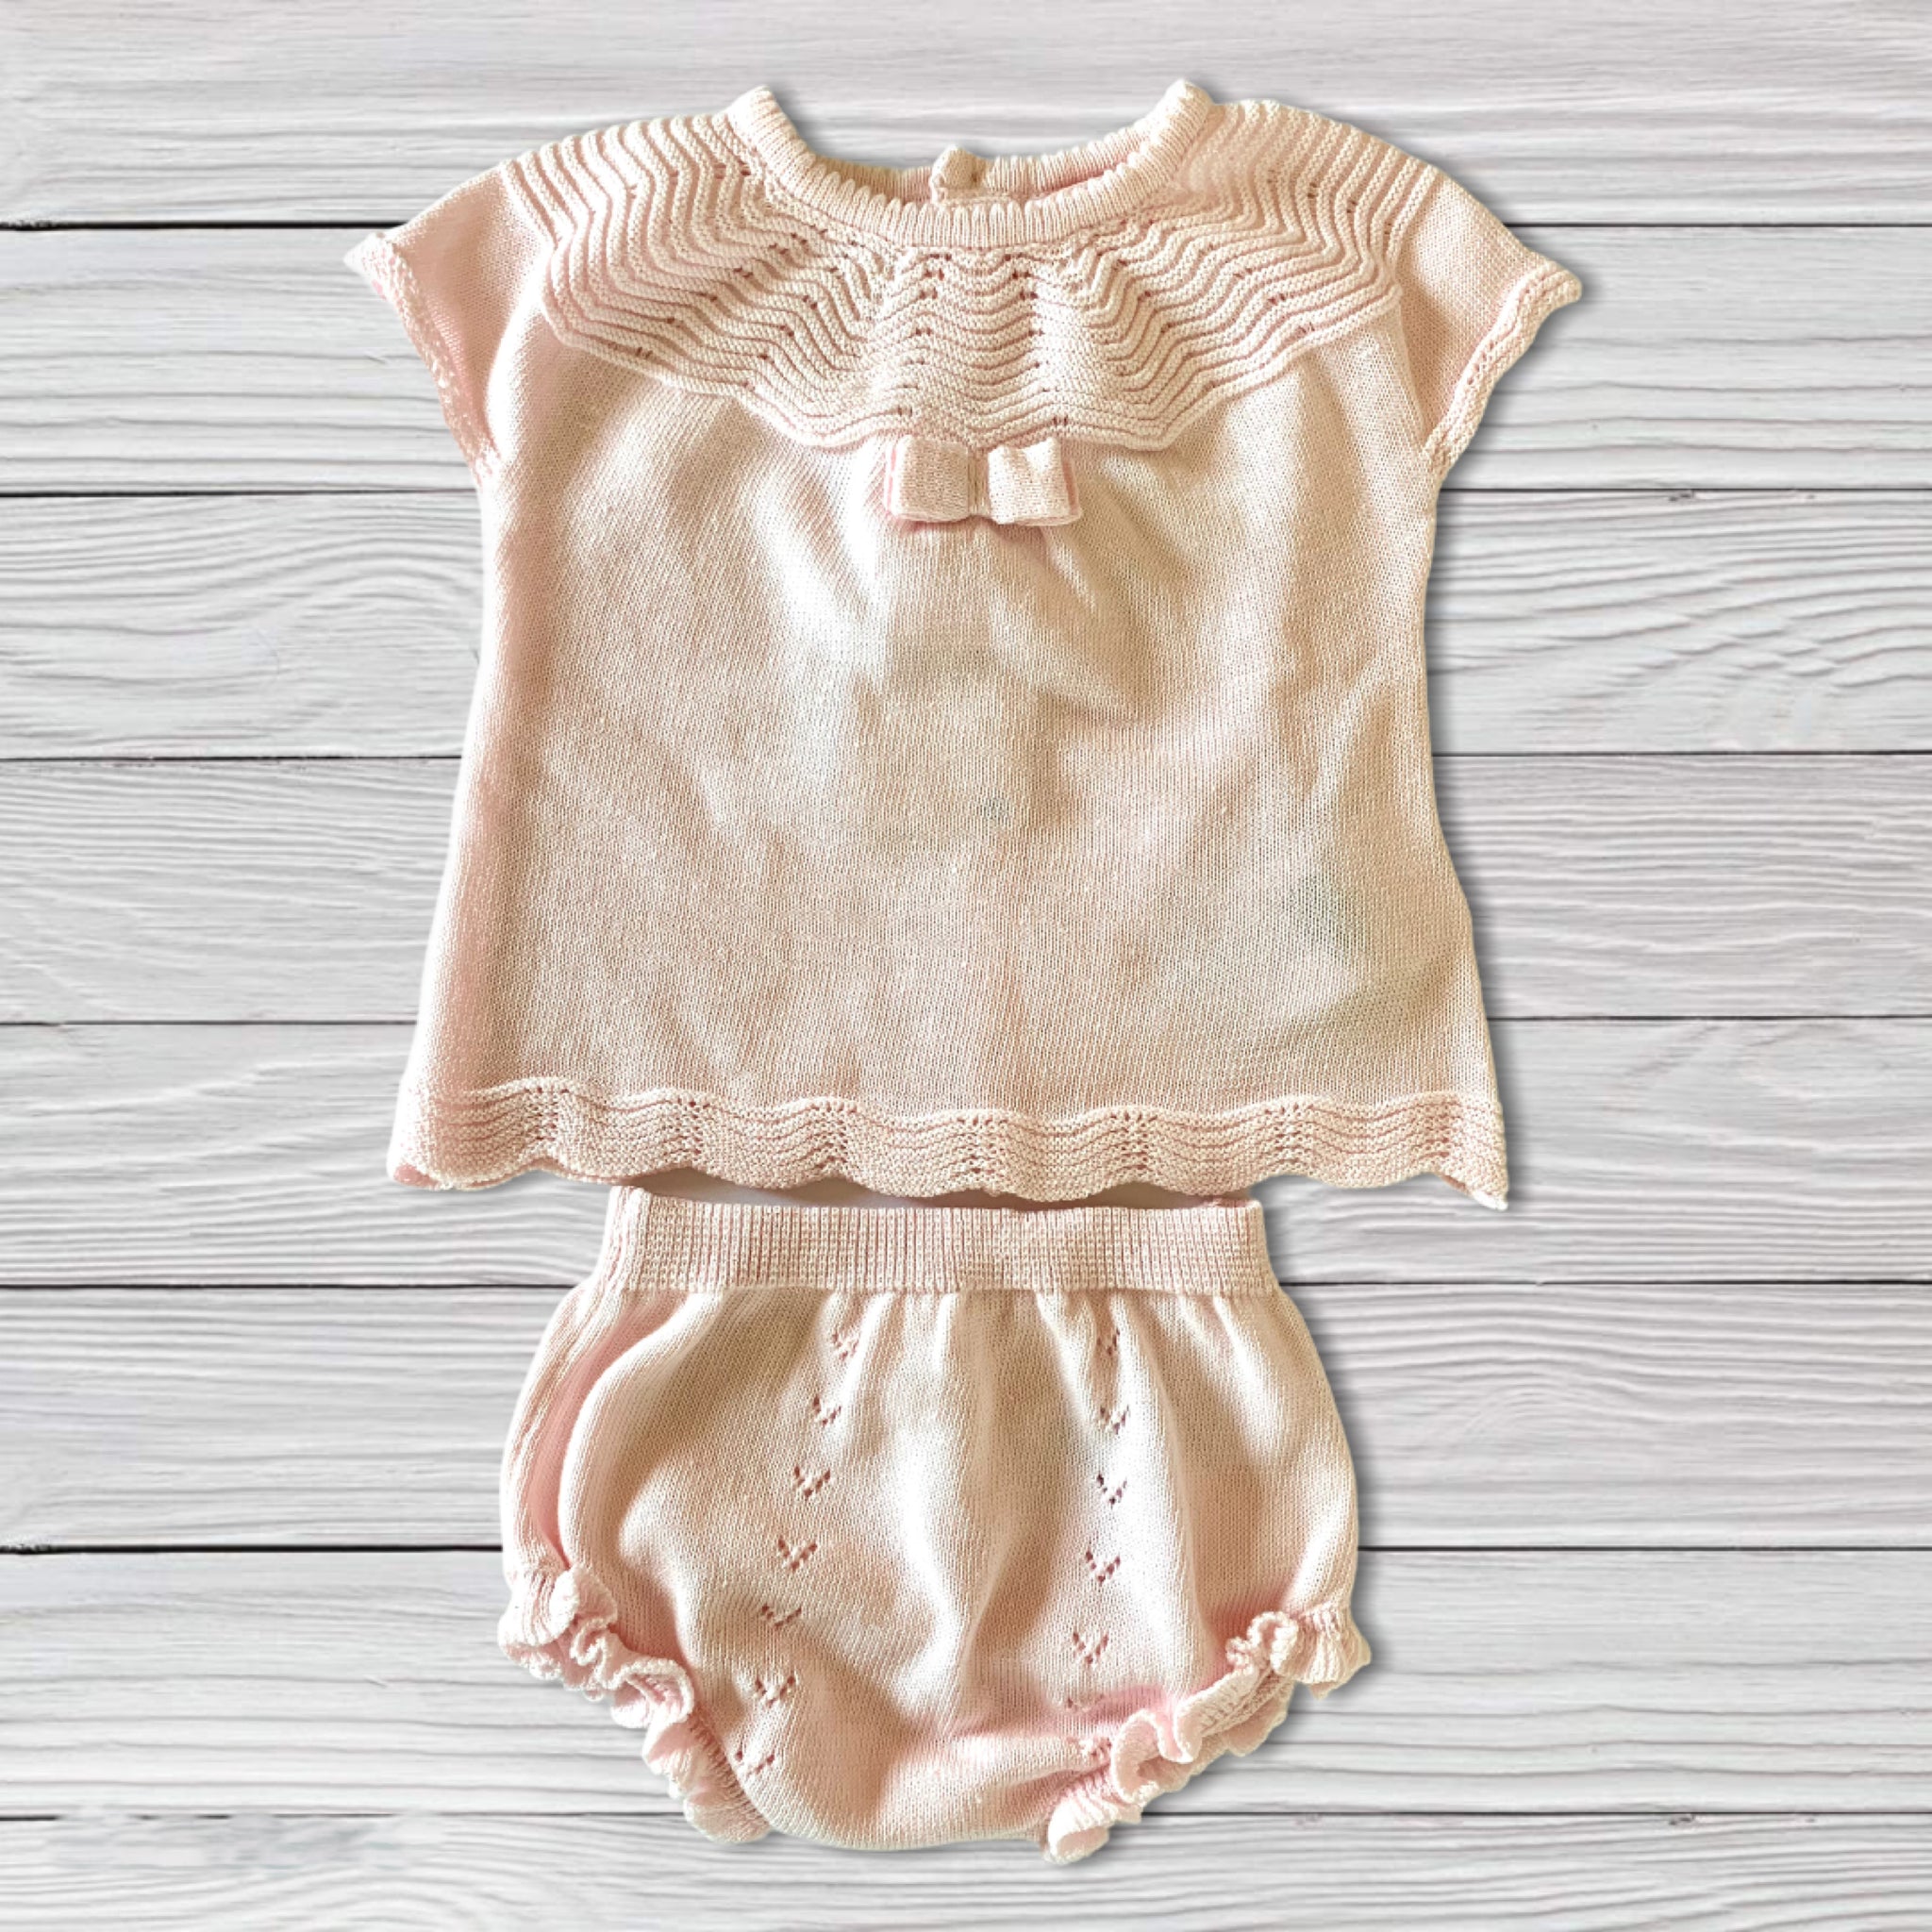 2 Piece Baby Pink Knit Outfit